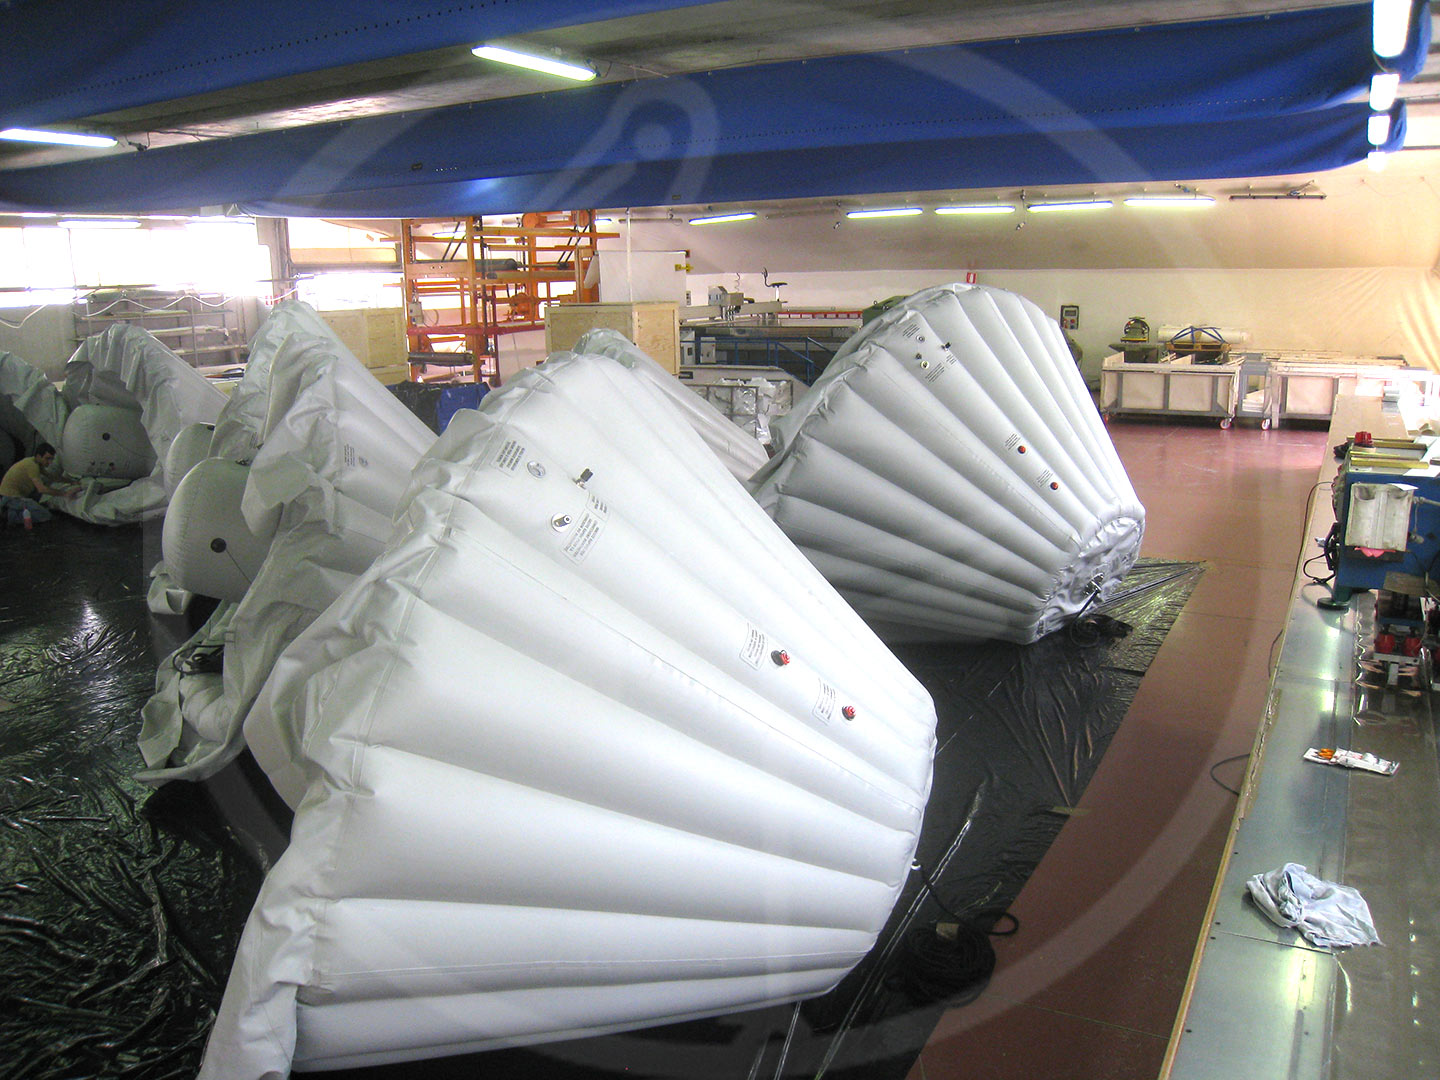 Inflatable protections detail for Ariane module New Guinea Base